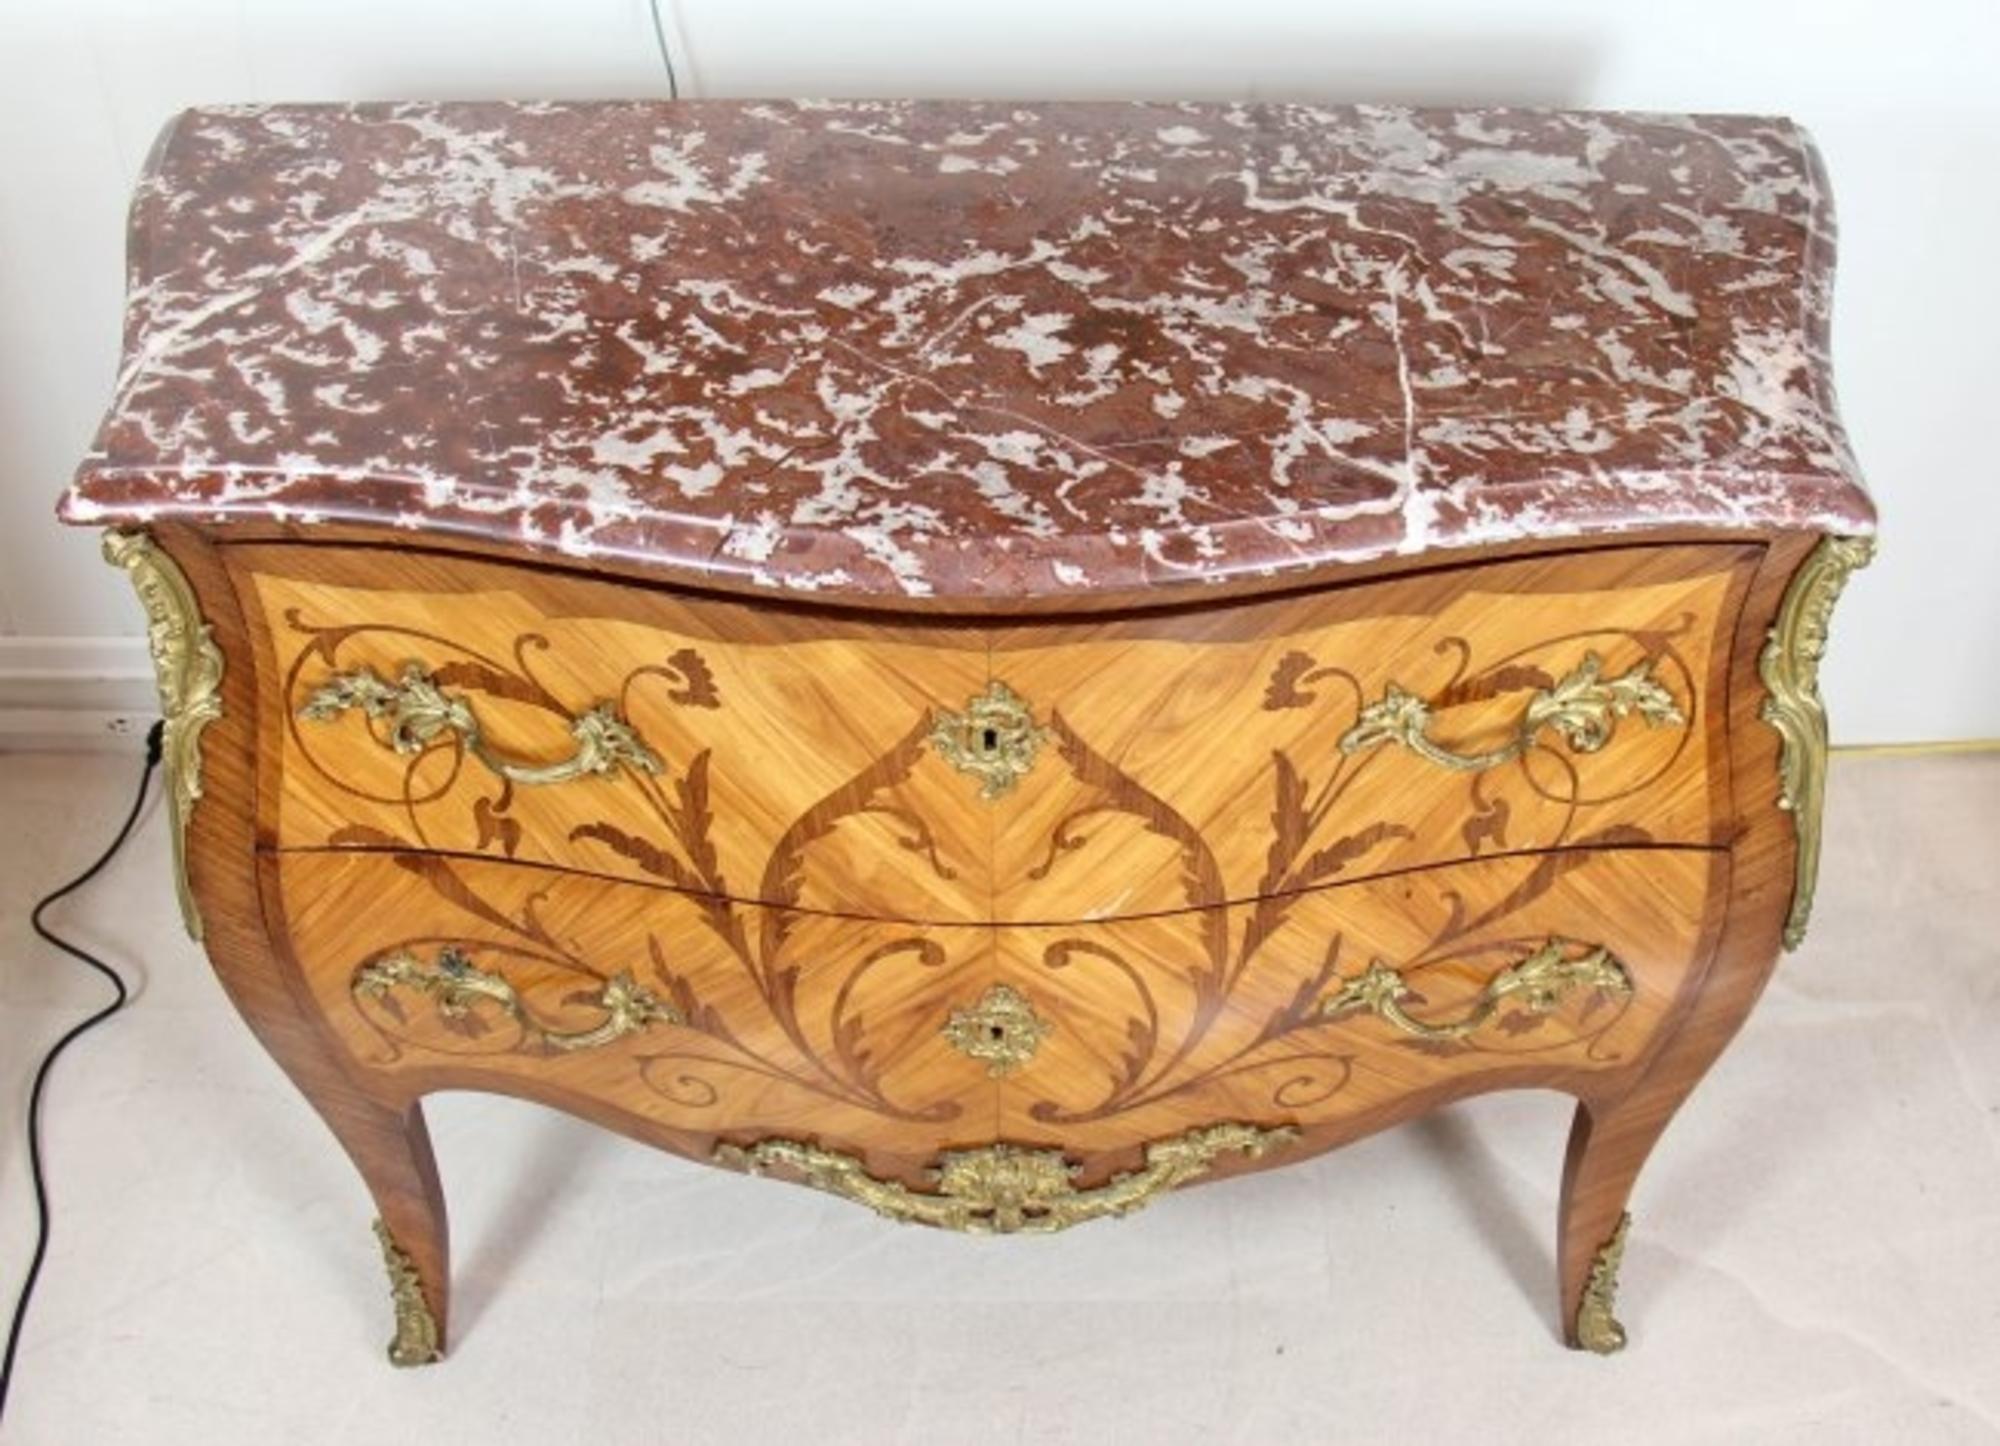 A Louis XV/XVI style transitional ormolu-mounted tulipwood, kingwood and fruitwood marquetry commode, centred by a lock on each drawer, serpentine sided rouge royal marble top.
A fine Louis XV style tulipwood and amaranthe marquetry commode, 19th